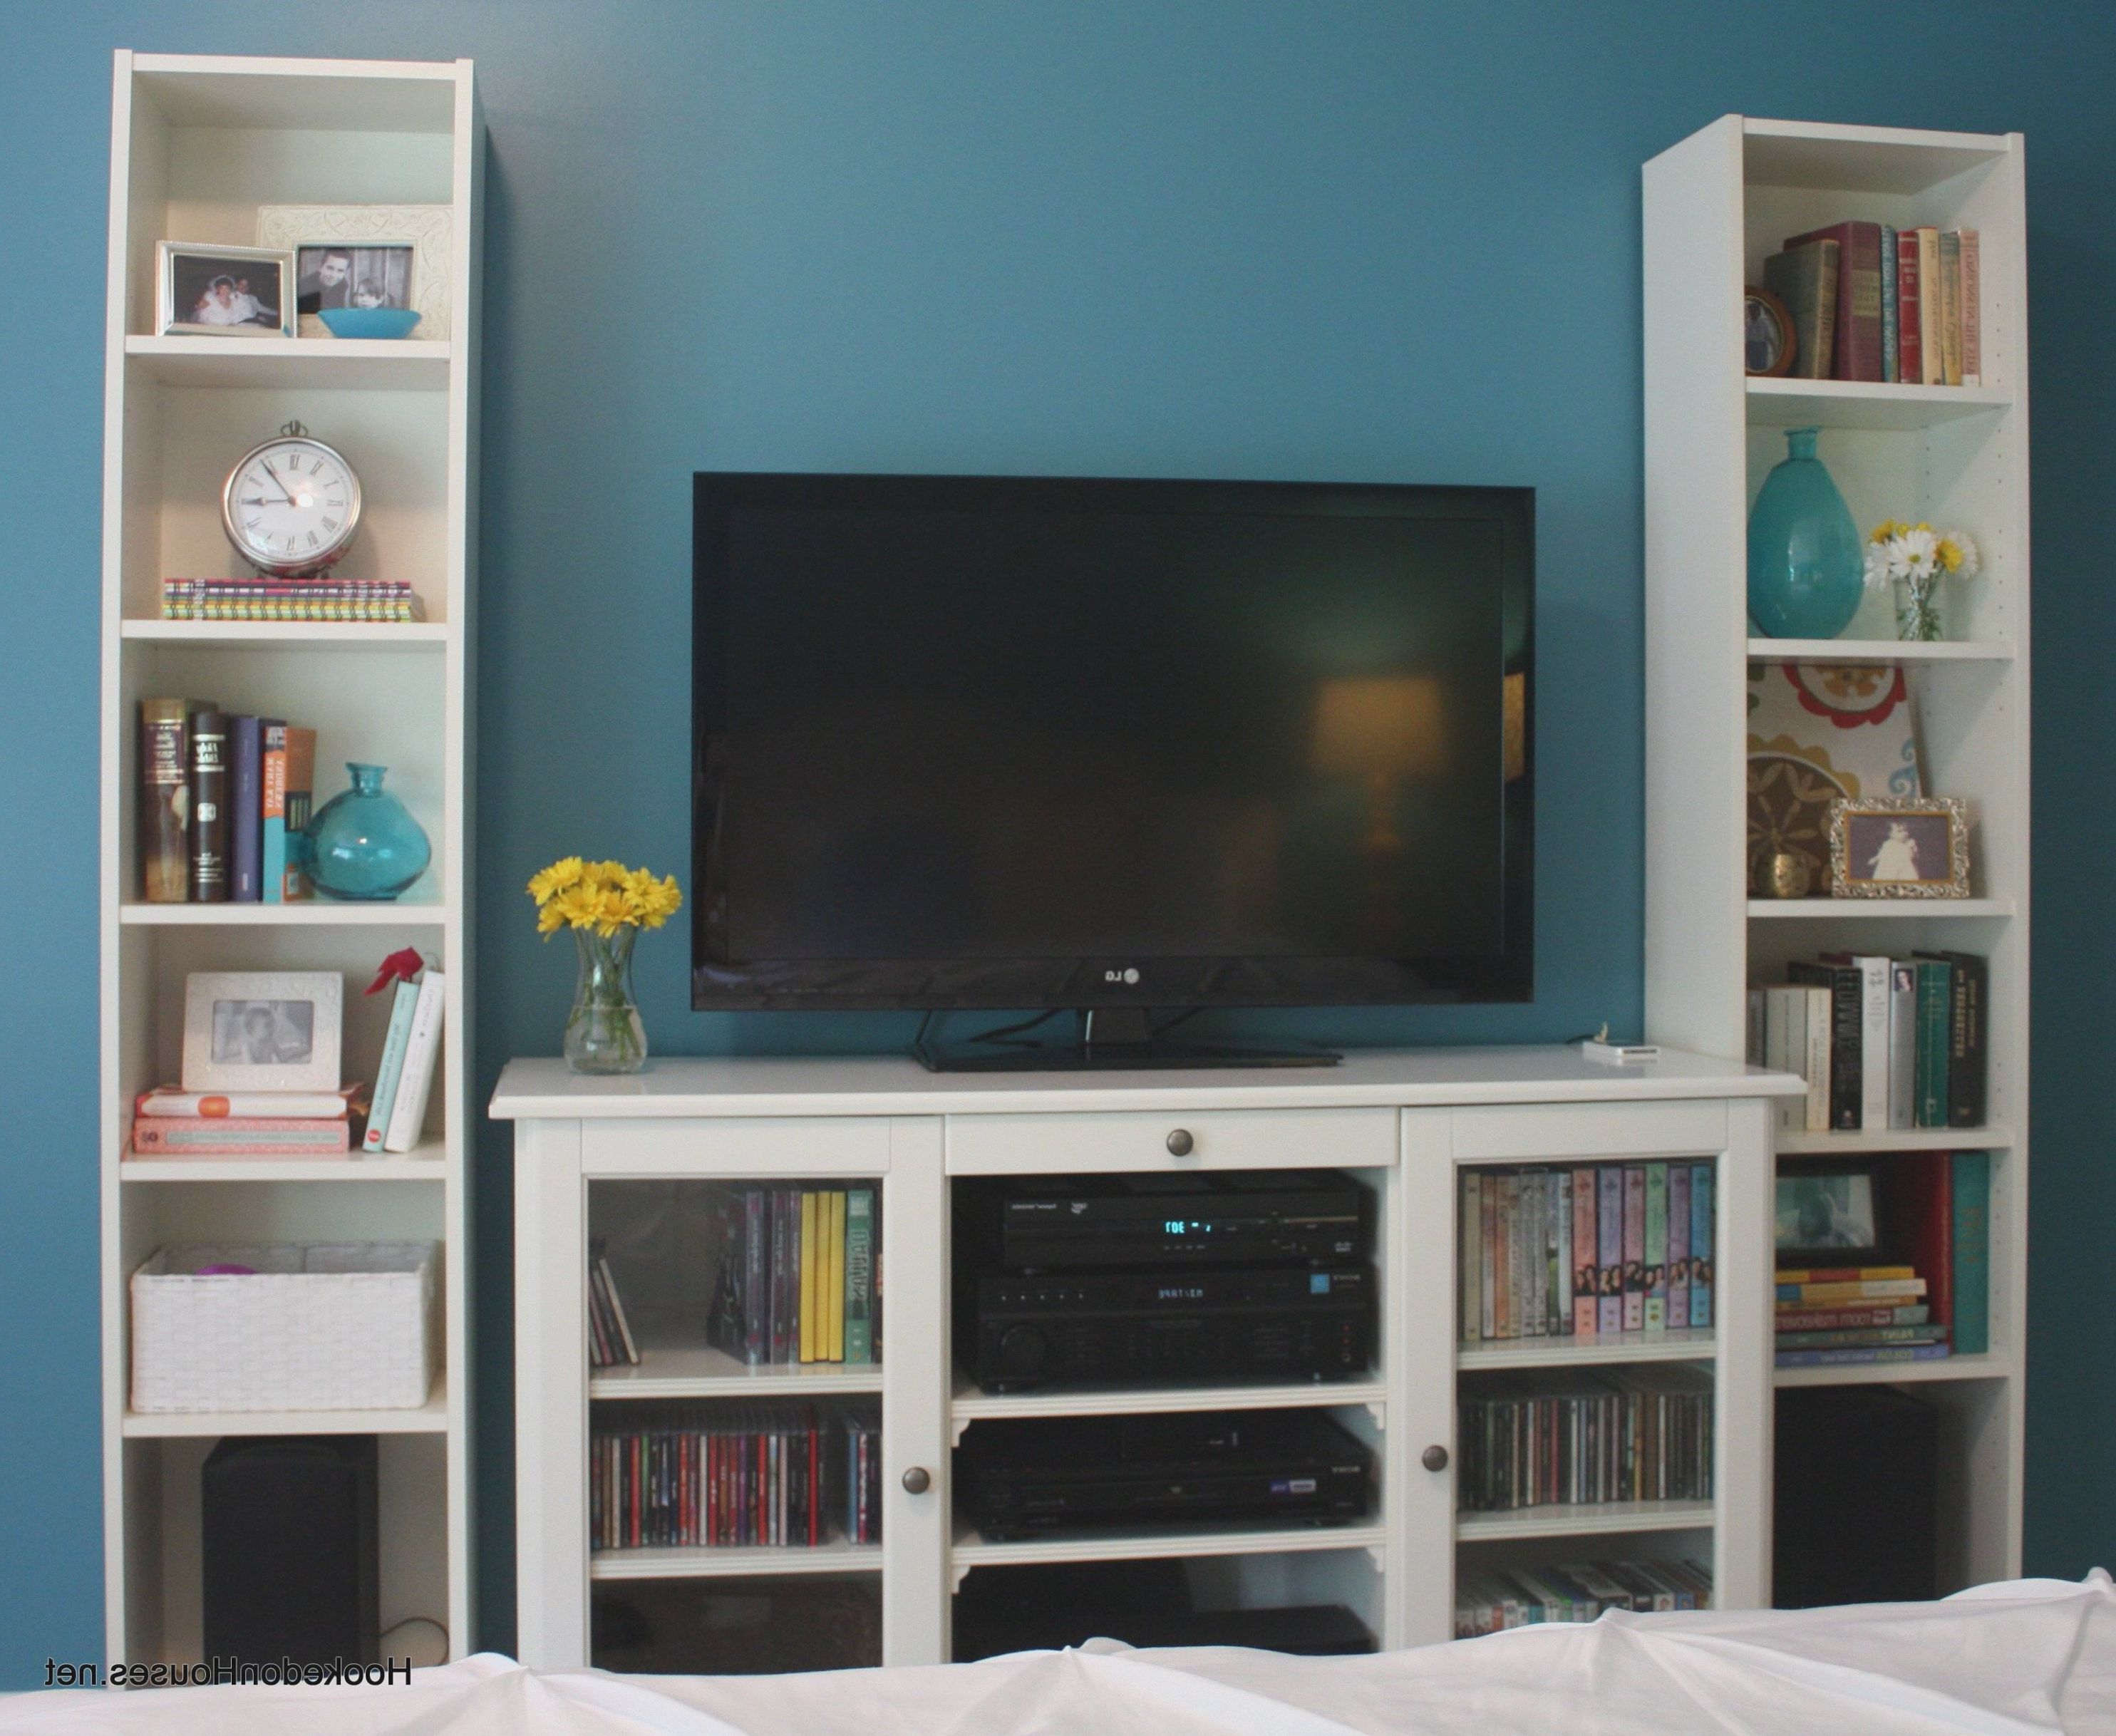 Best And Newest Bookshelf And Tv Stands Throughout Bookcase With Tv Stand Ikea Billy Leaning Bookshelf Combo Uk Kallax (View 9 of 20)